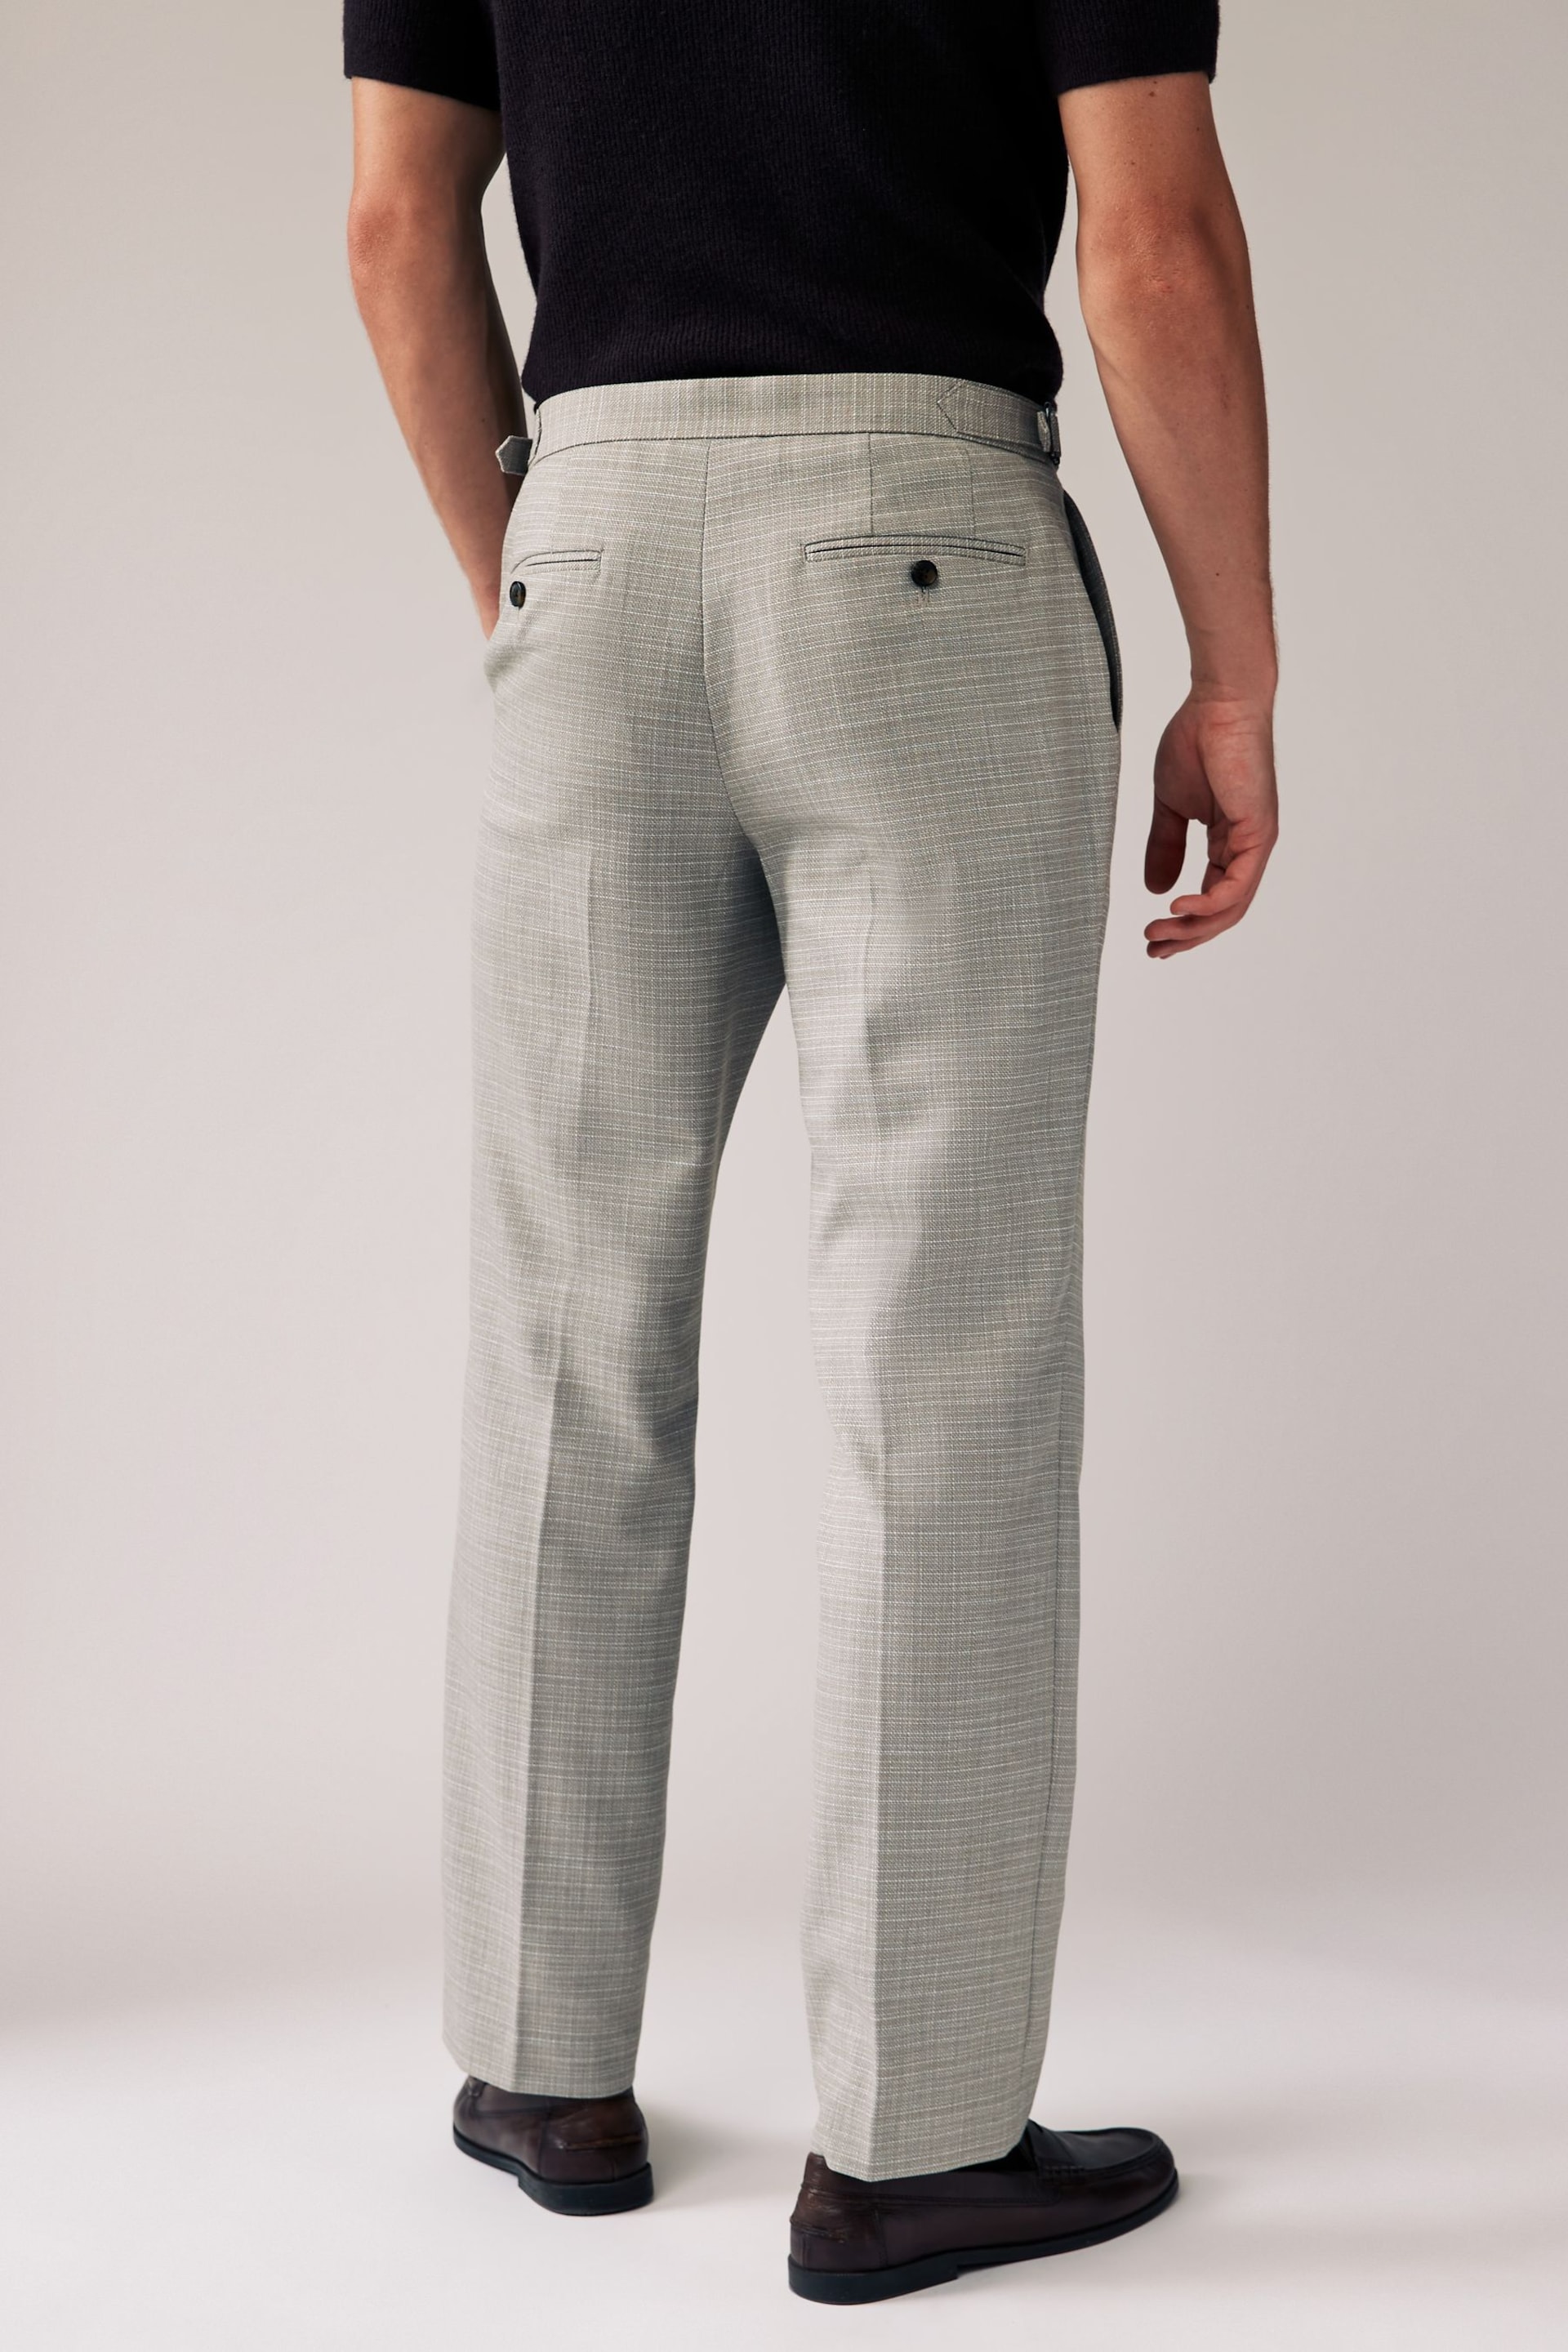 Stone Textured Side Adjuster Trousers - Image 5 of 9